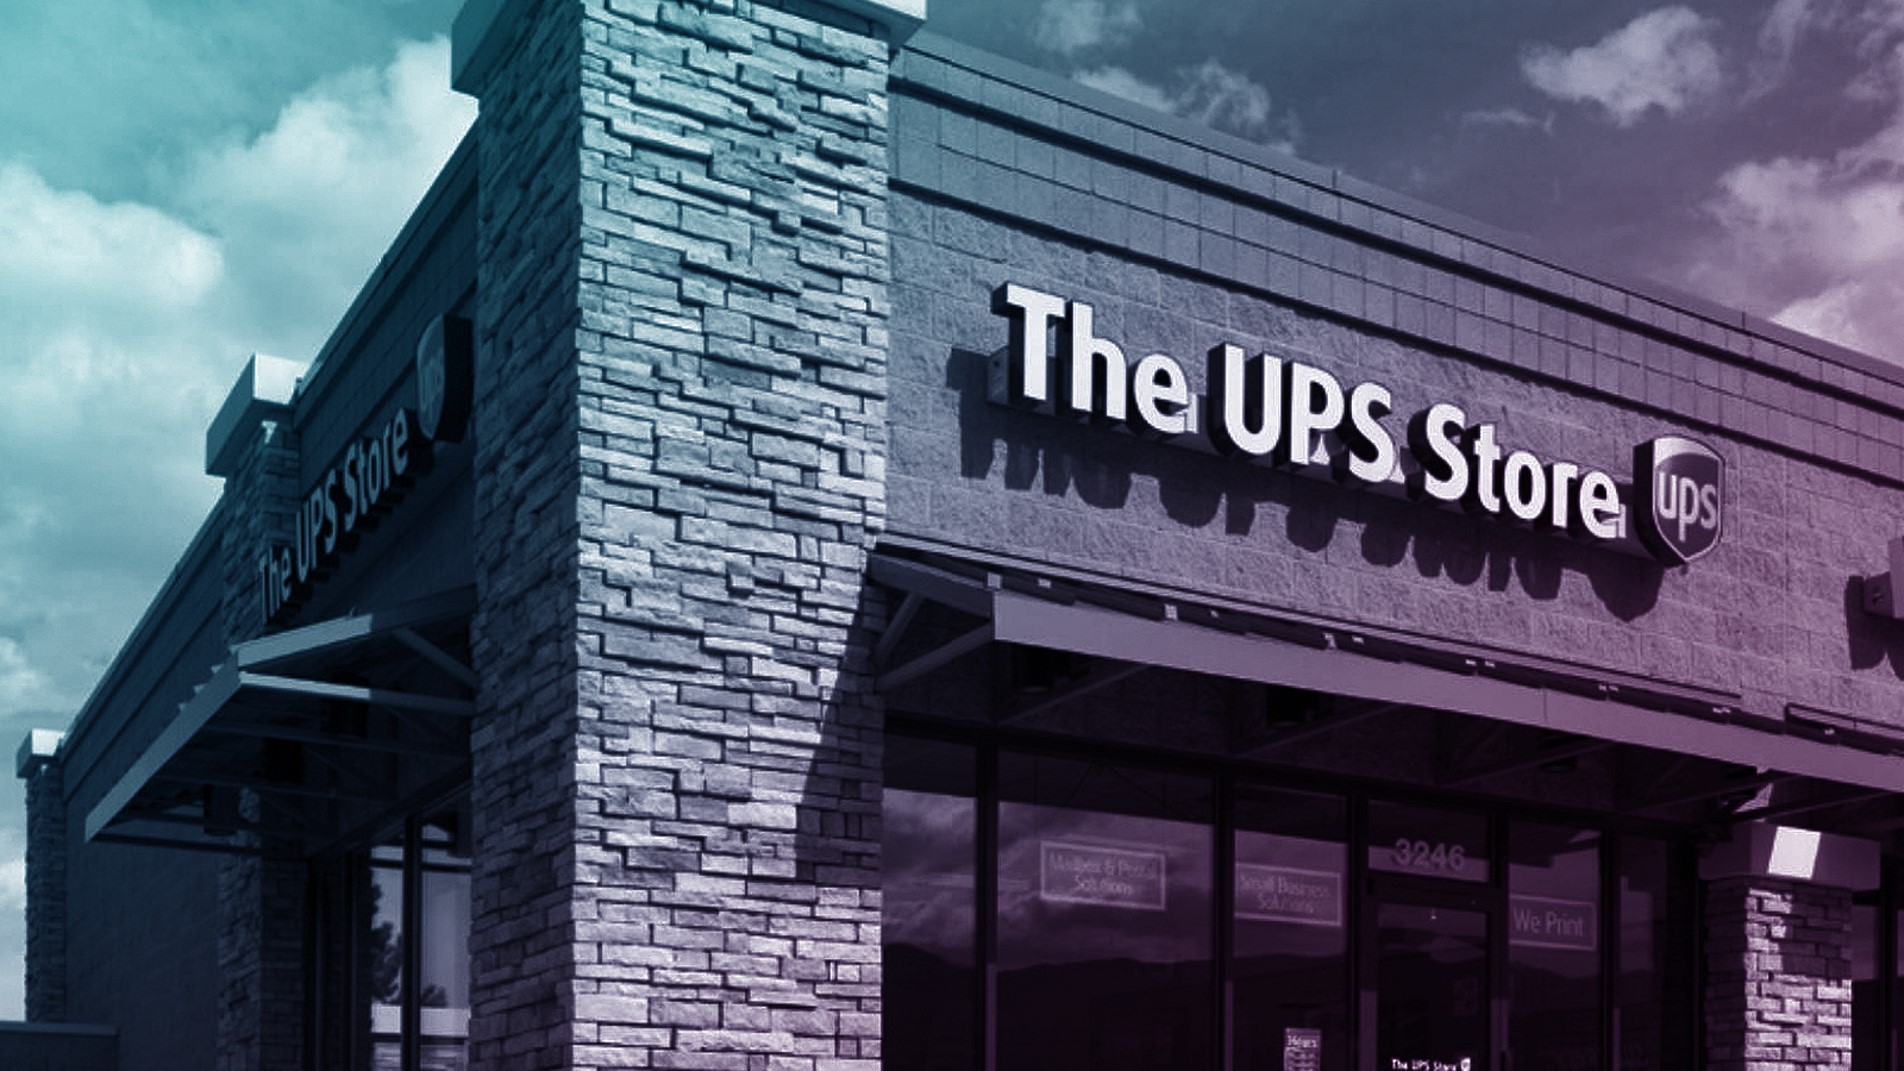 [Case Study]: Mindstream Media Group Drives 14% Lift in Organic Traffic for The UPS Store